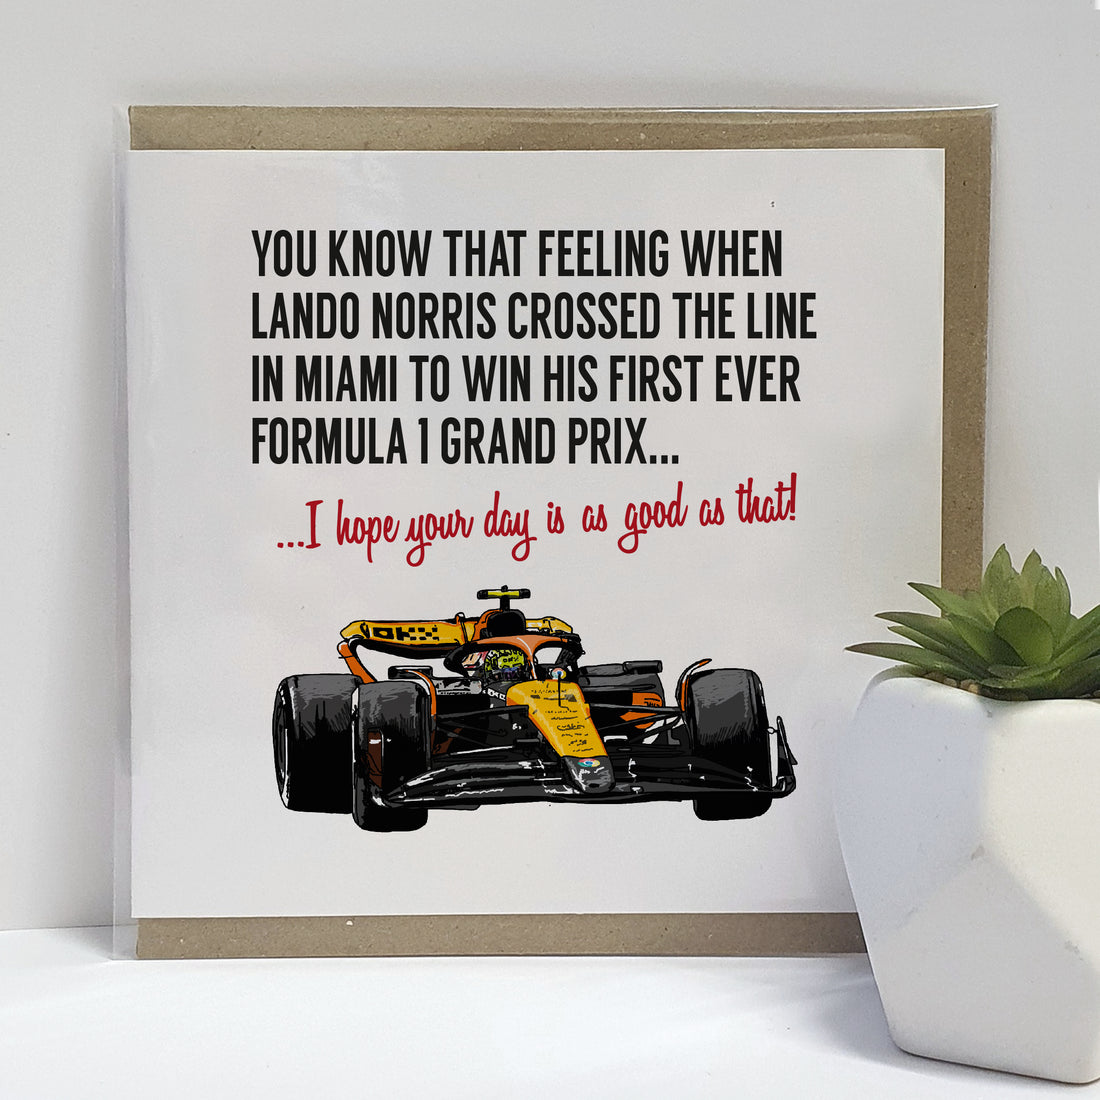 Formula 1 themed greeting card showcasing Lando Norris' race car as he wins his first Grand Prix in Miami. The card's text reads 'You know that feeling when Lando Norris crossed the line in Miami to win his first ever Formula 1 Grand Prix... I hope your day is as good as that!' Created by Local Lingo, the card captures the thrill of victory and is perfect for fans and enthusiasts of motorsport and Lando Norris